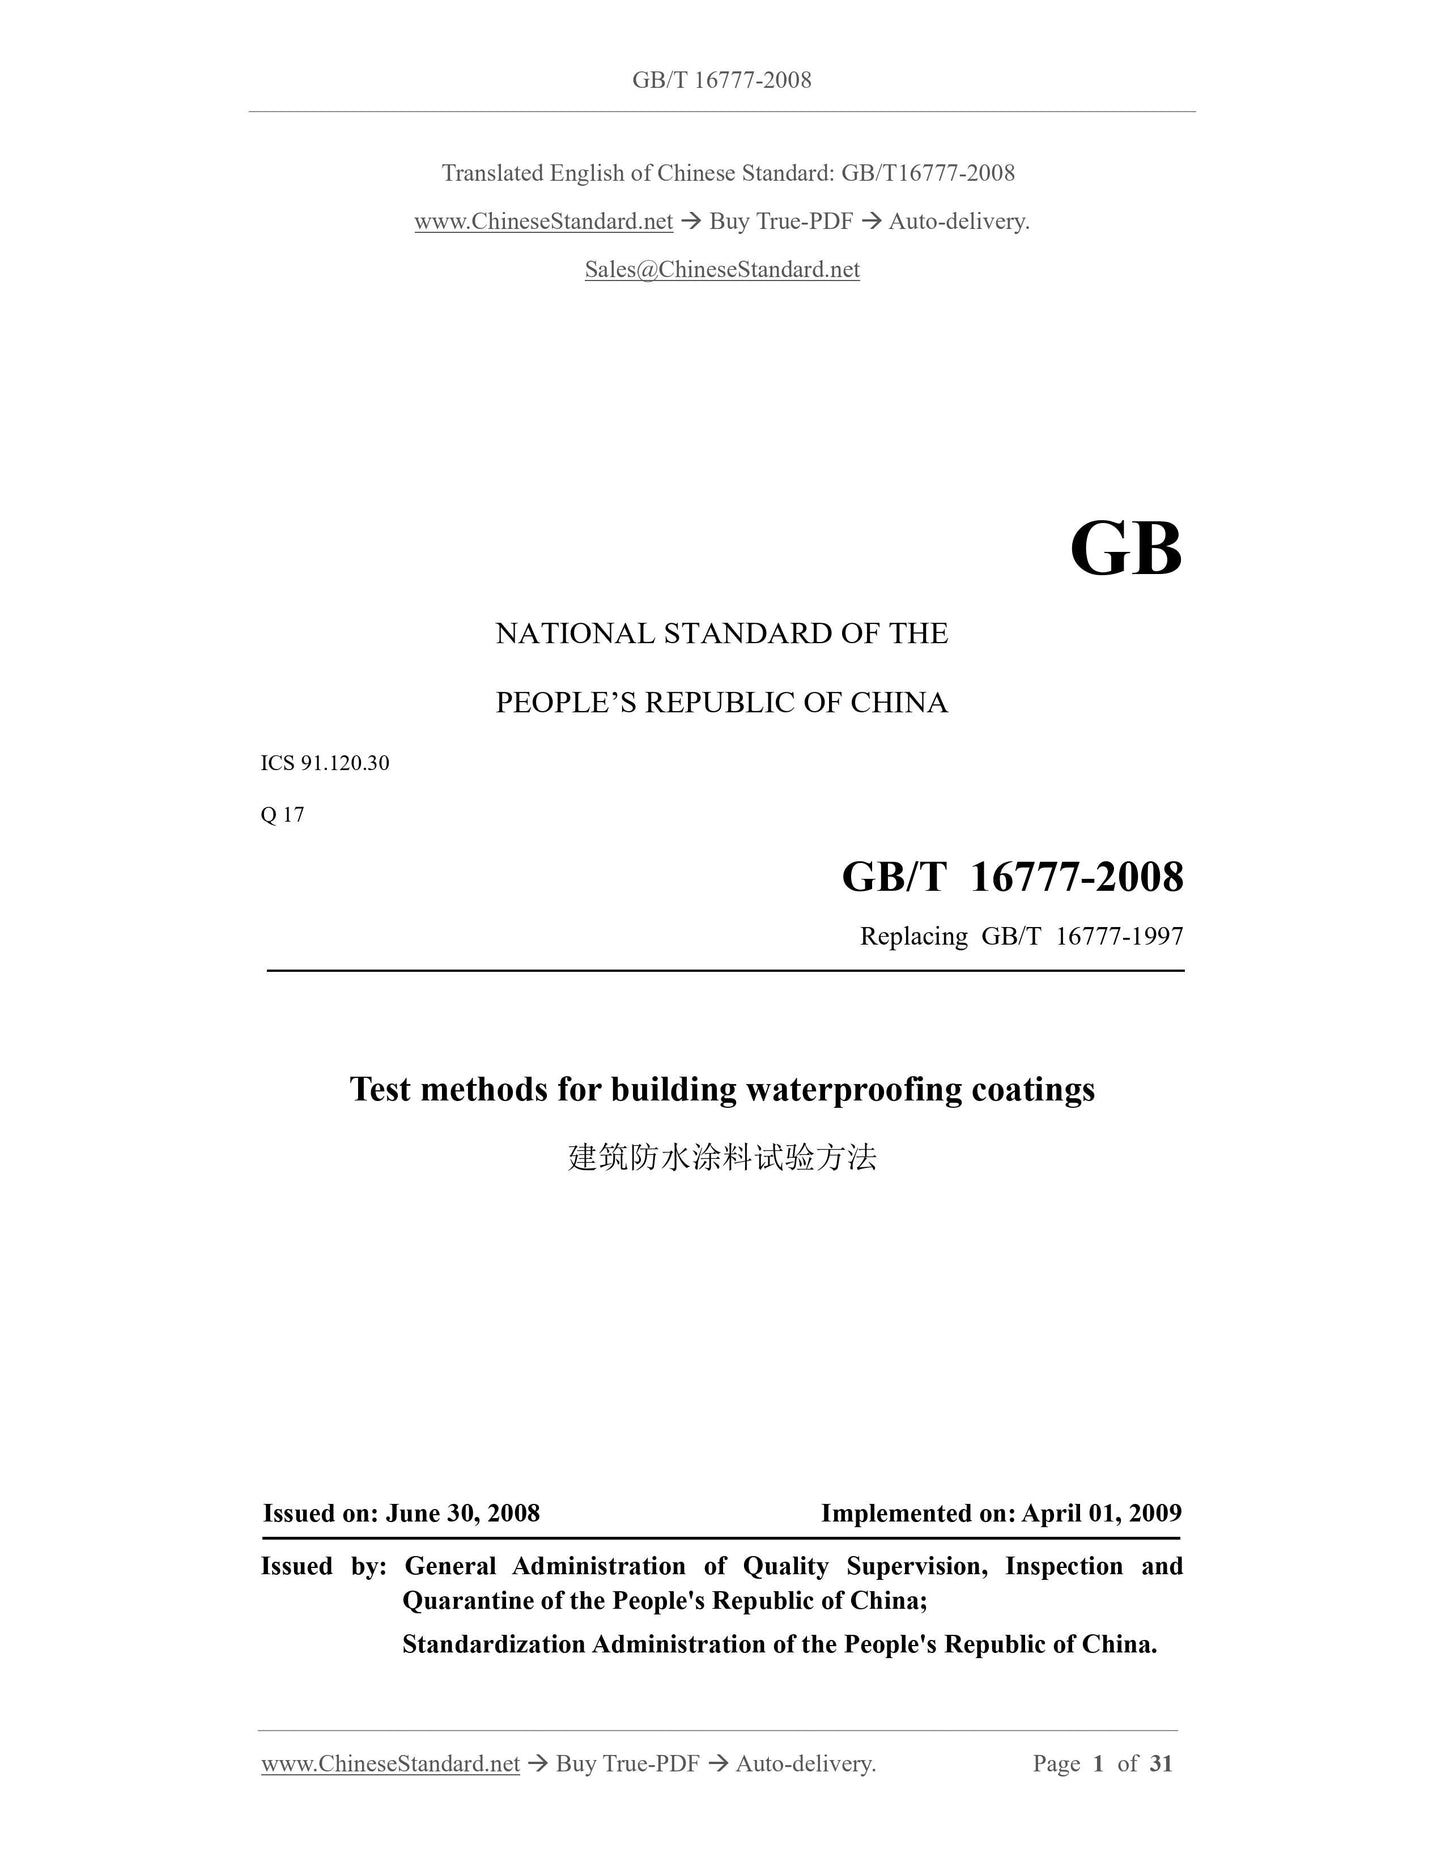 GB/T 16777-2008 Page 1